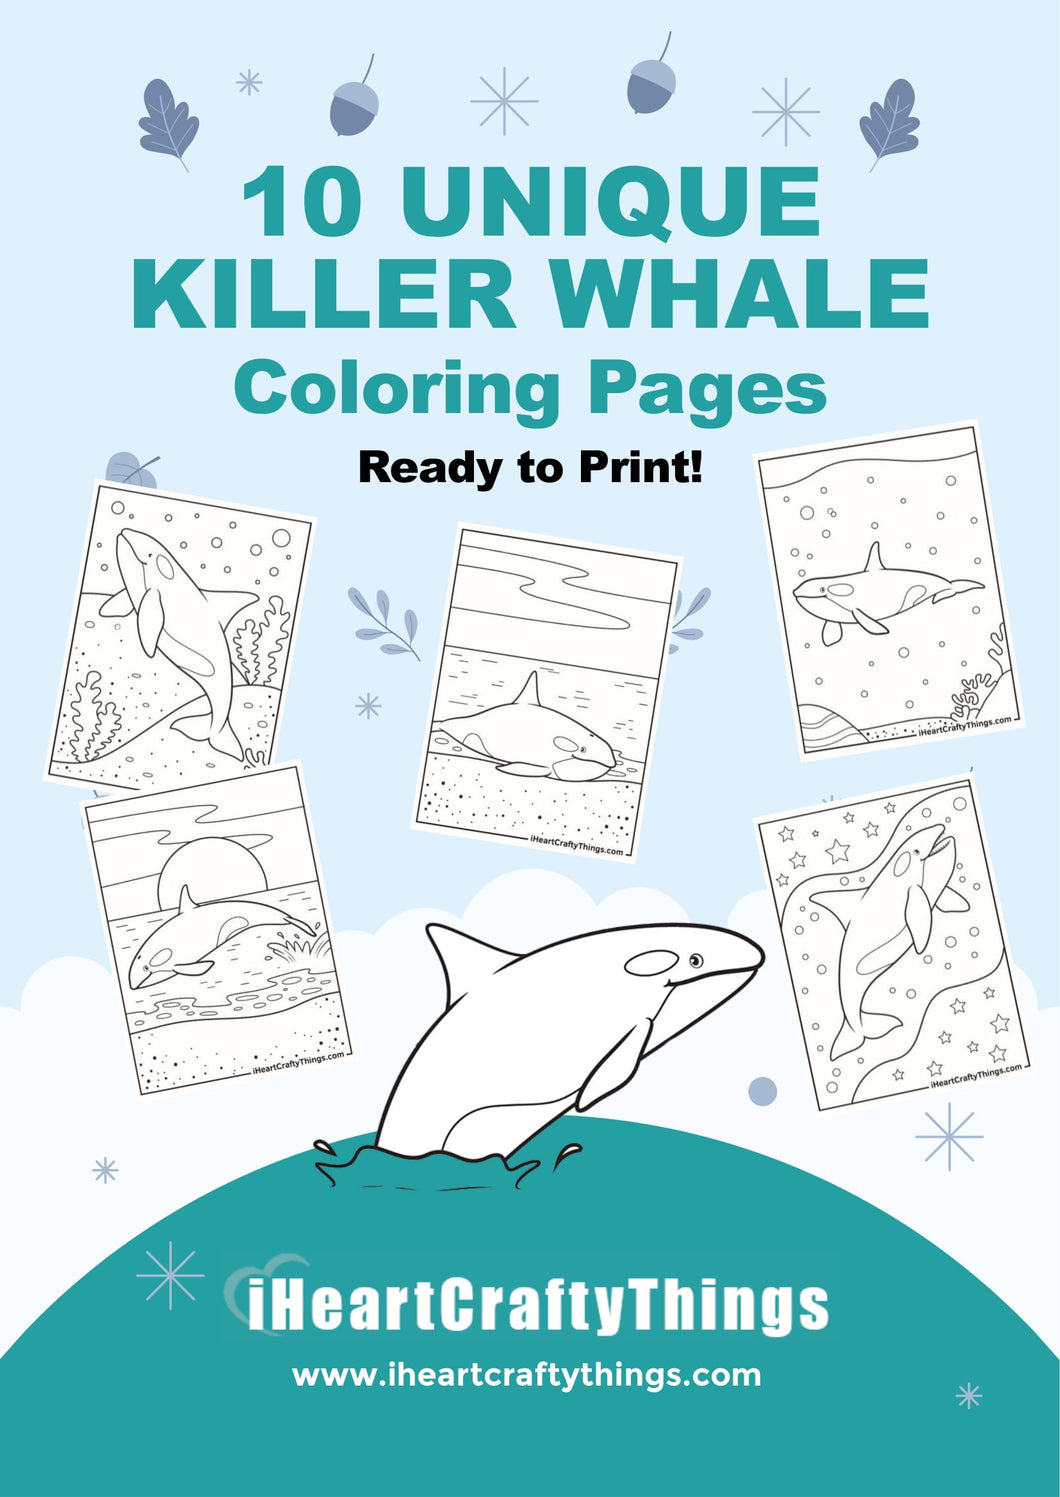 10 KILLER WHALE COLORING PAGES